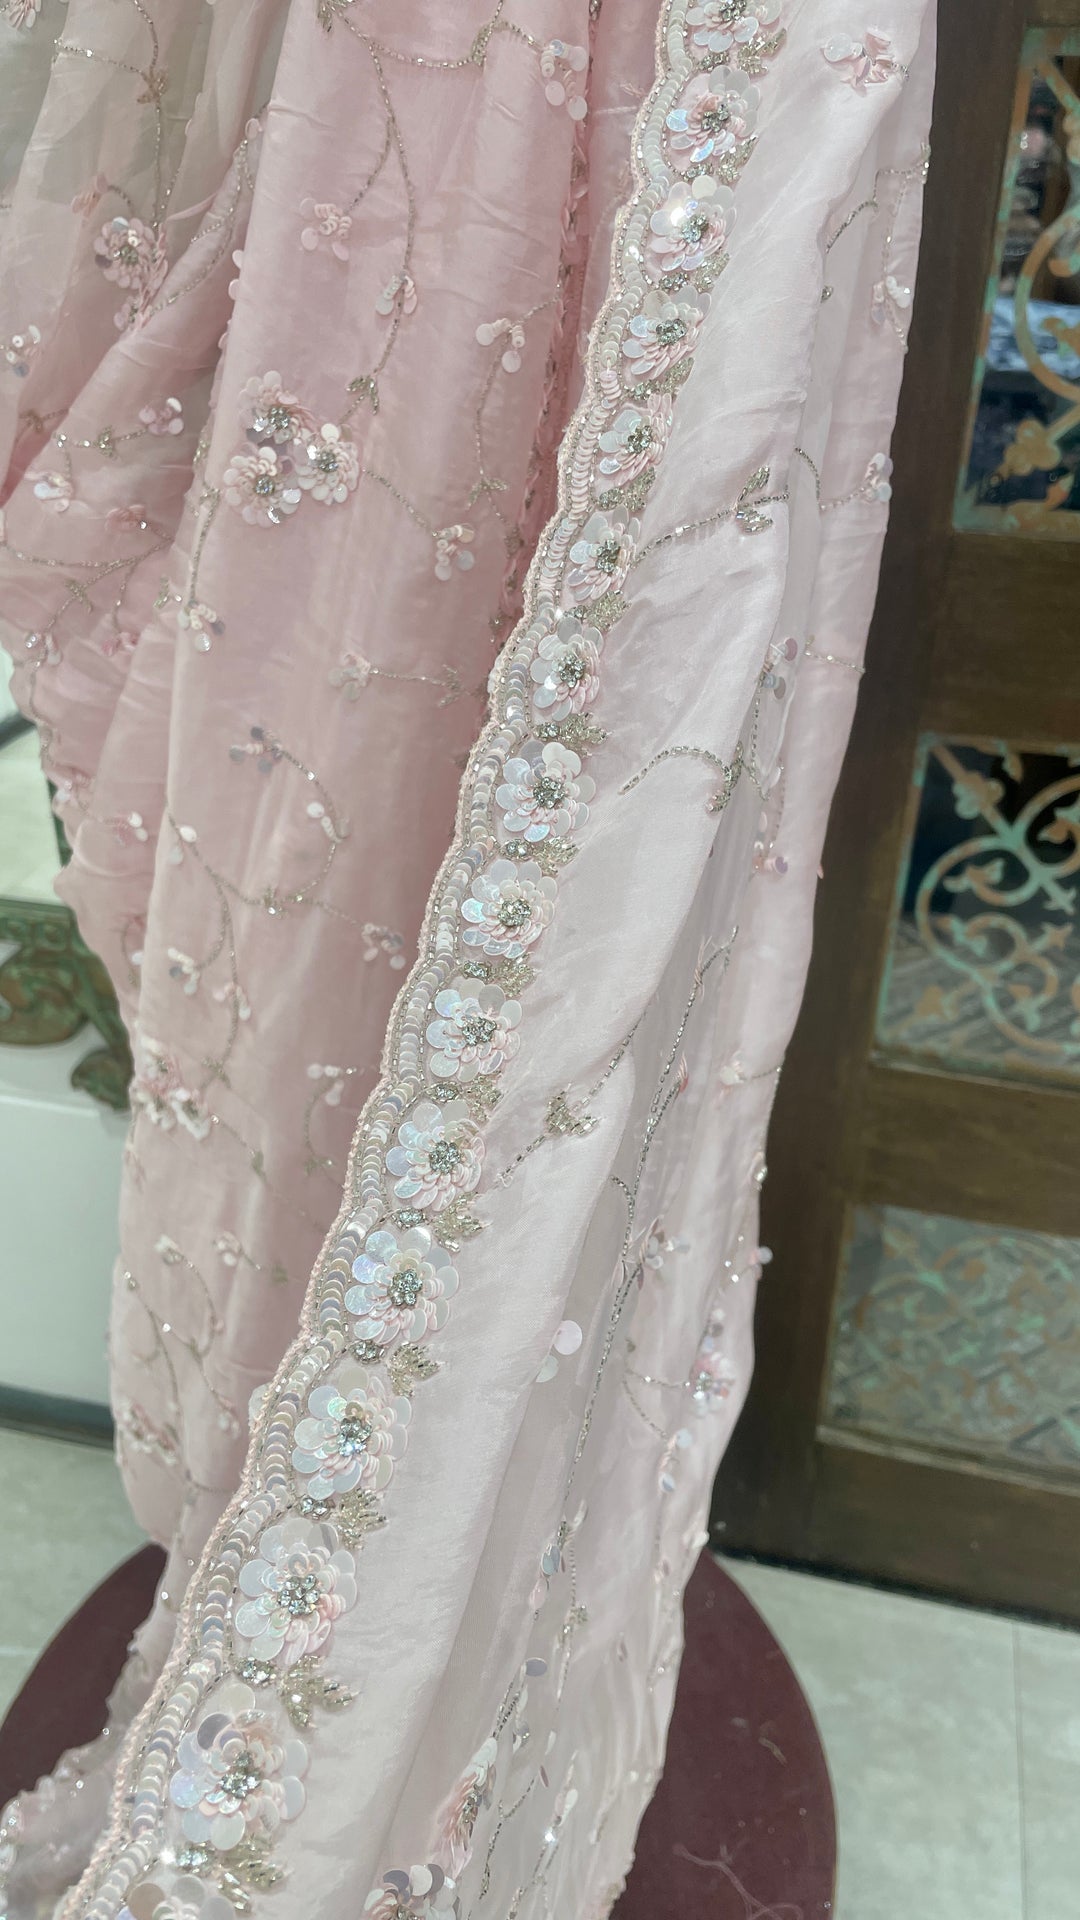 Pink crepe saree with embellishments